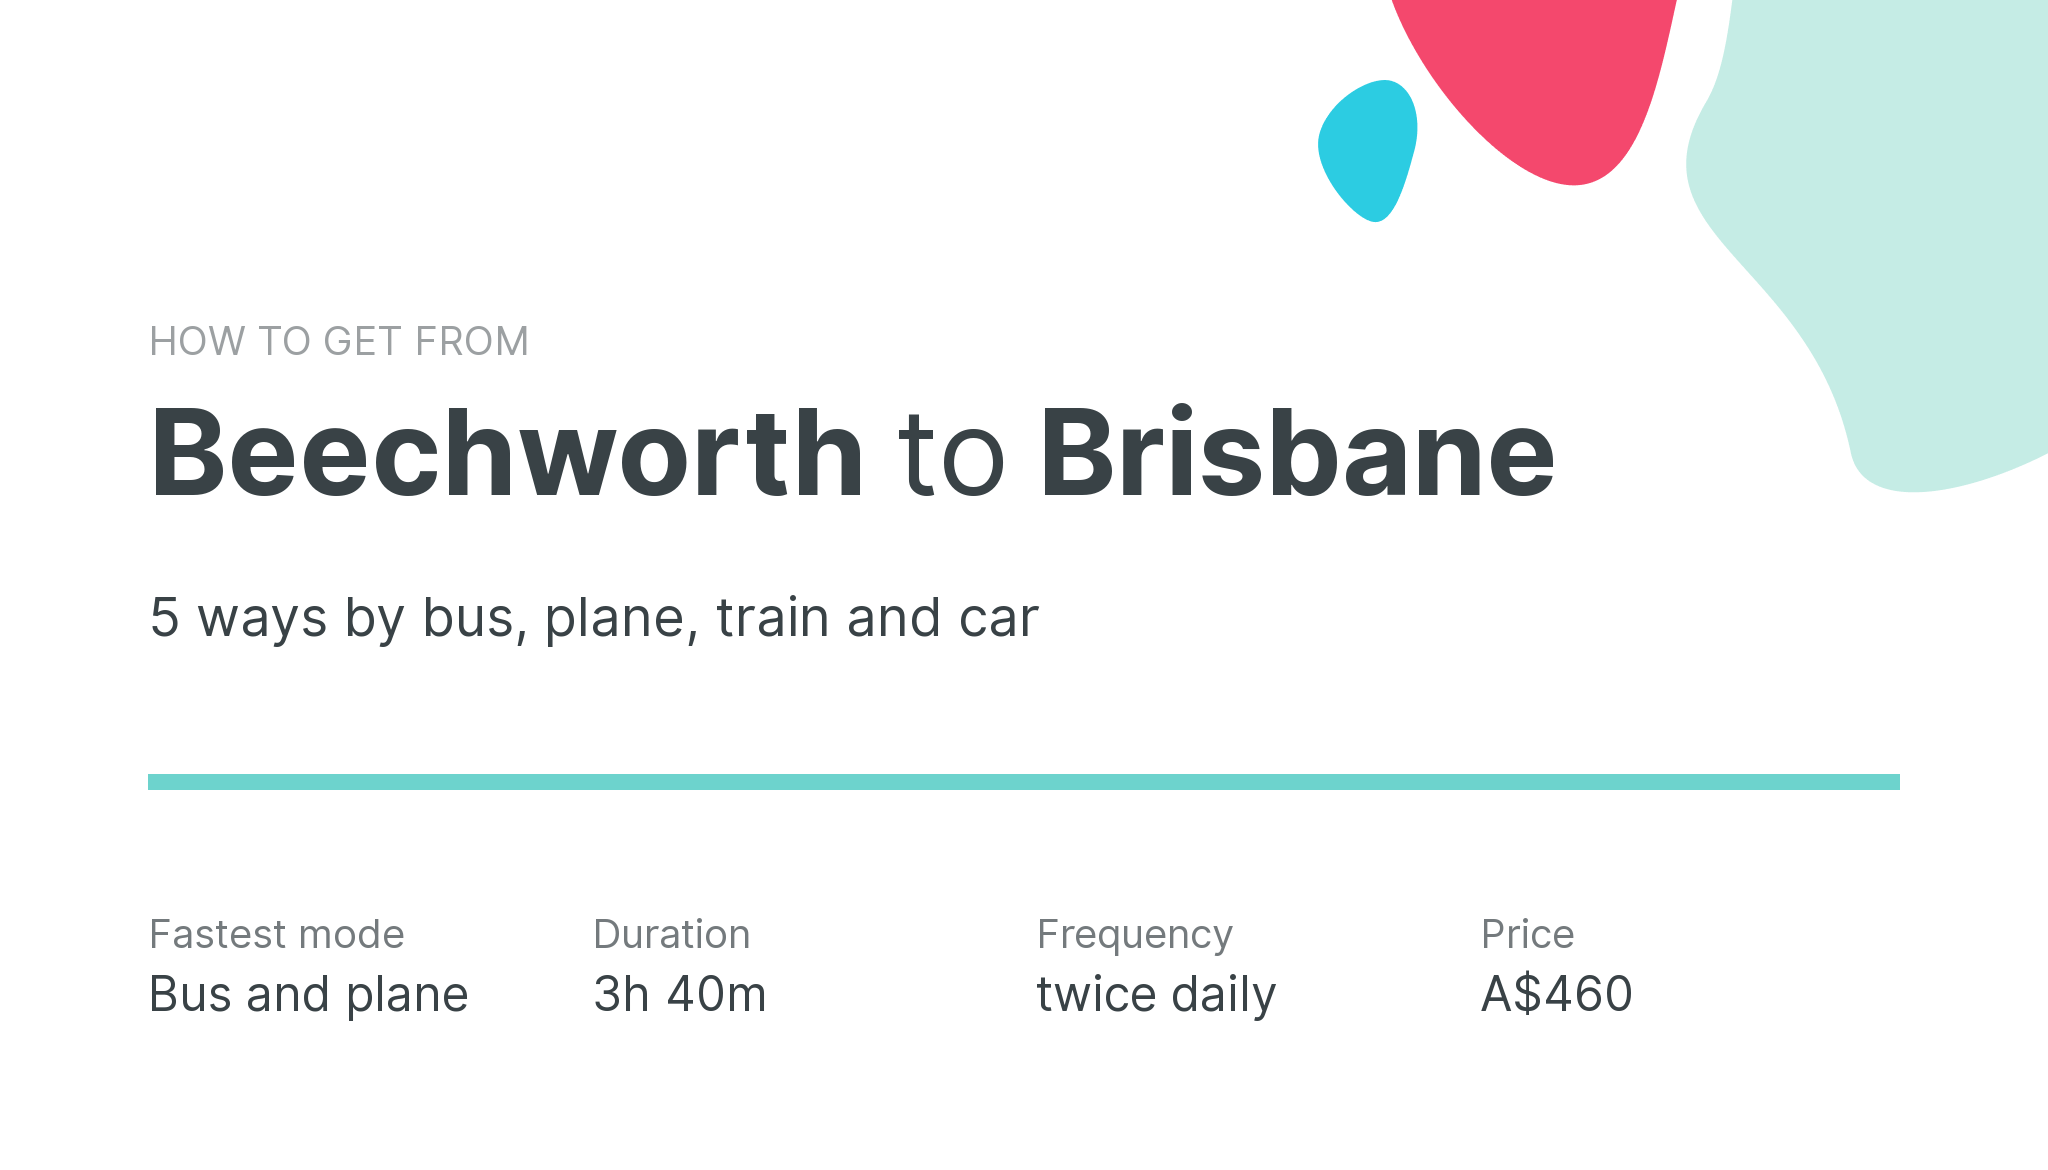 How do I get from Beechworth to Brisbane